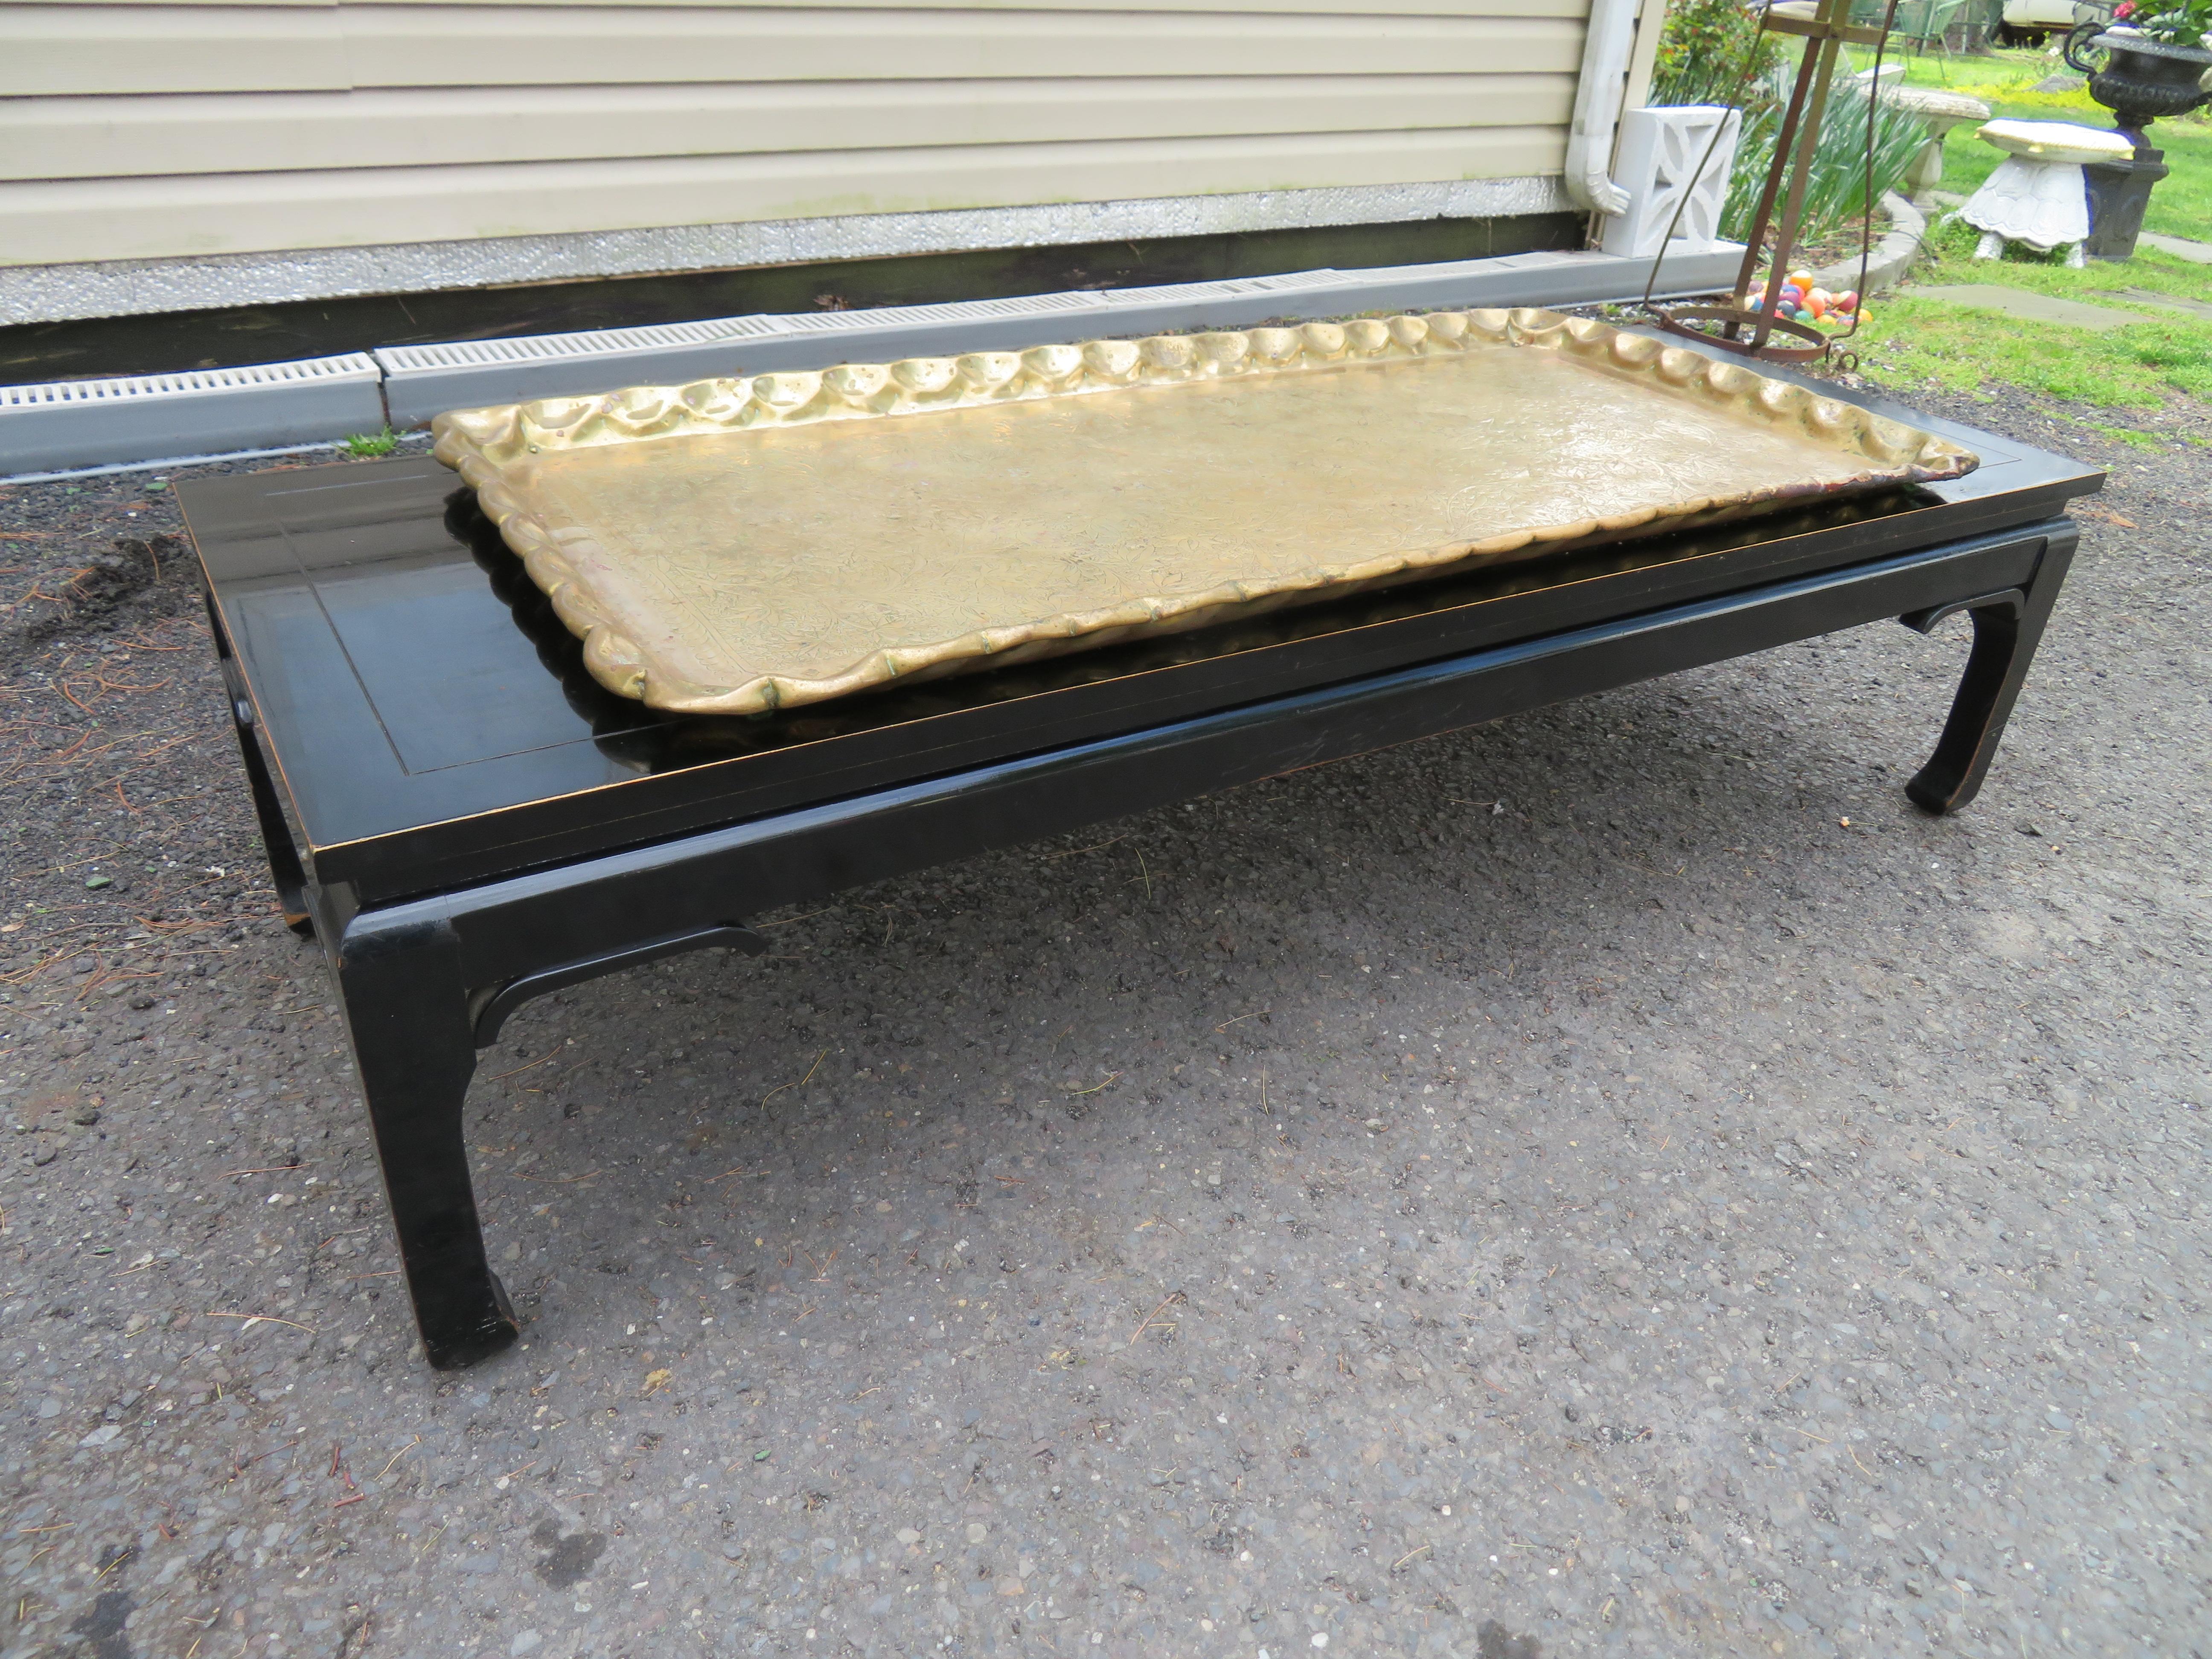 Charming Boho Chic Asain style black lacquered coffee table with attached brass tray. We love the heavy brass tray with its rich patina and the vintage charm of the black lacquered coffee table. This table has tremendous vintage appeal with a